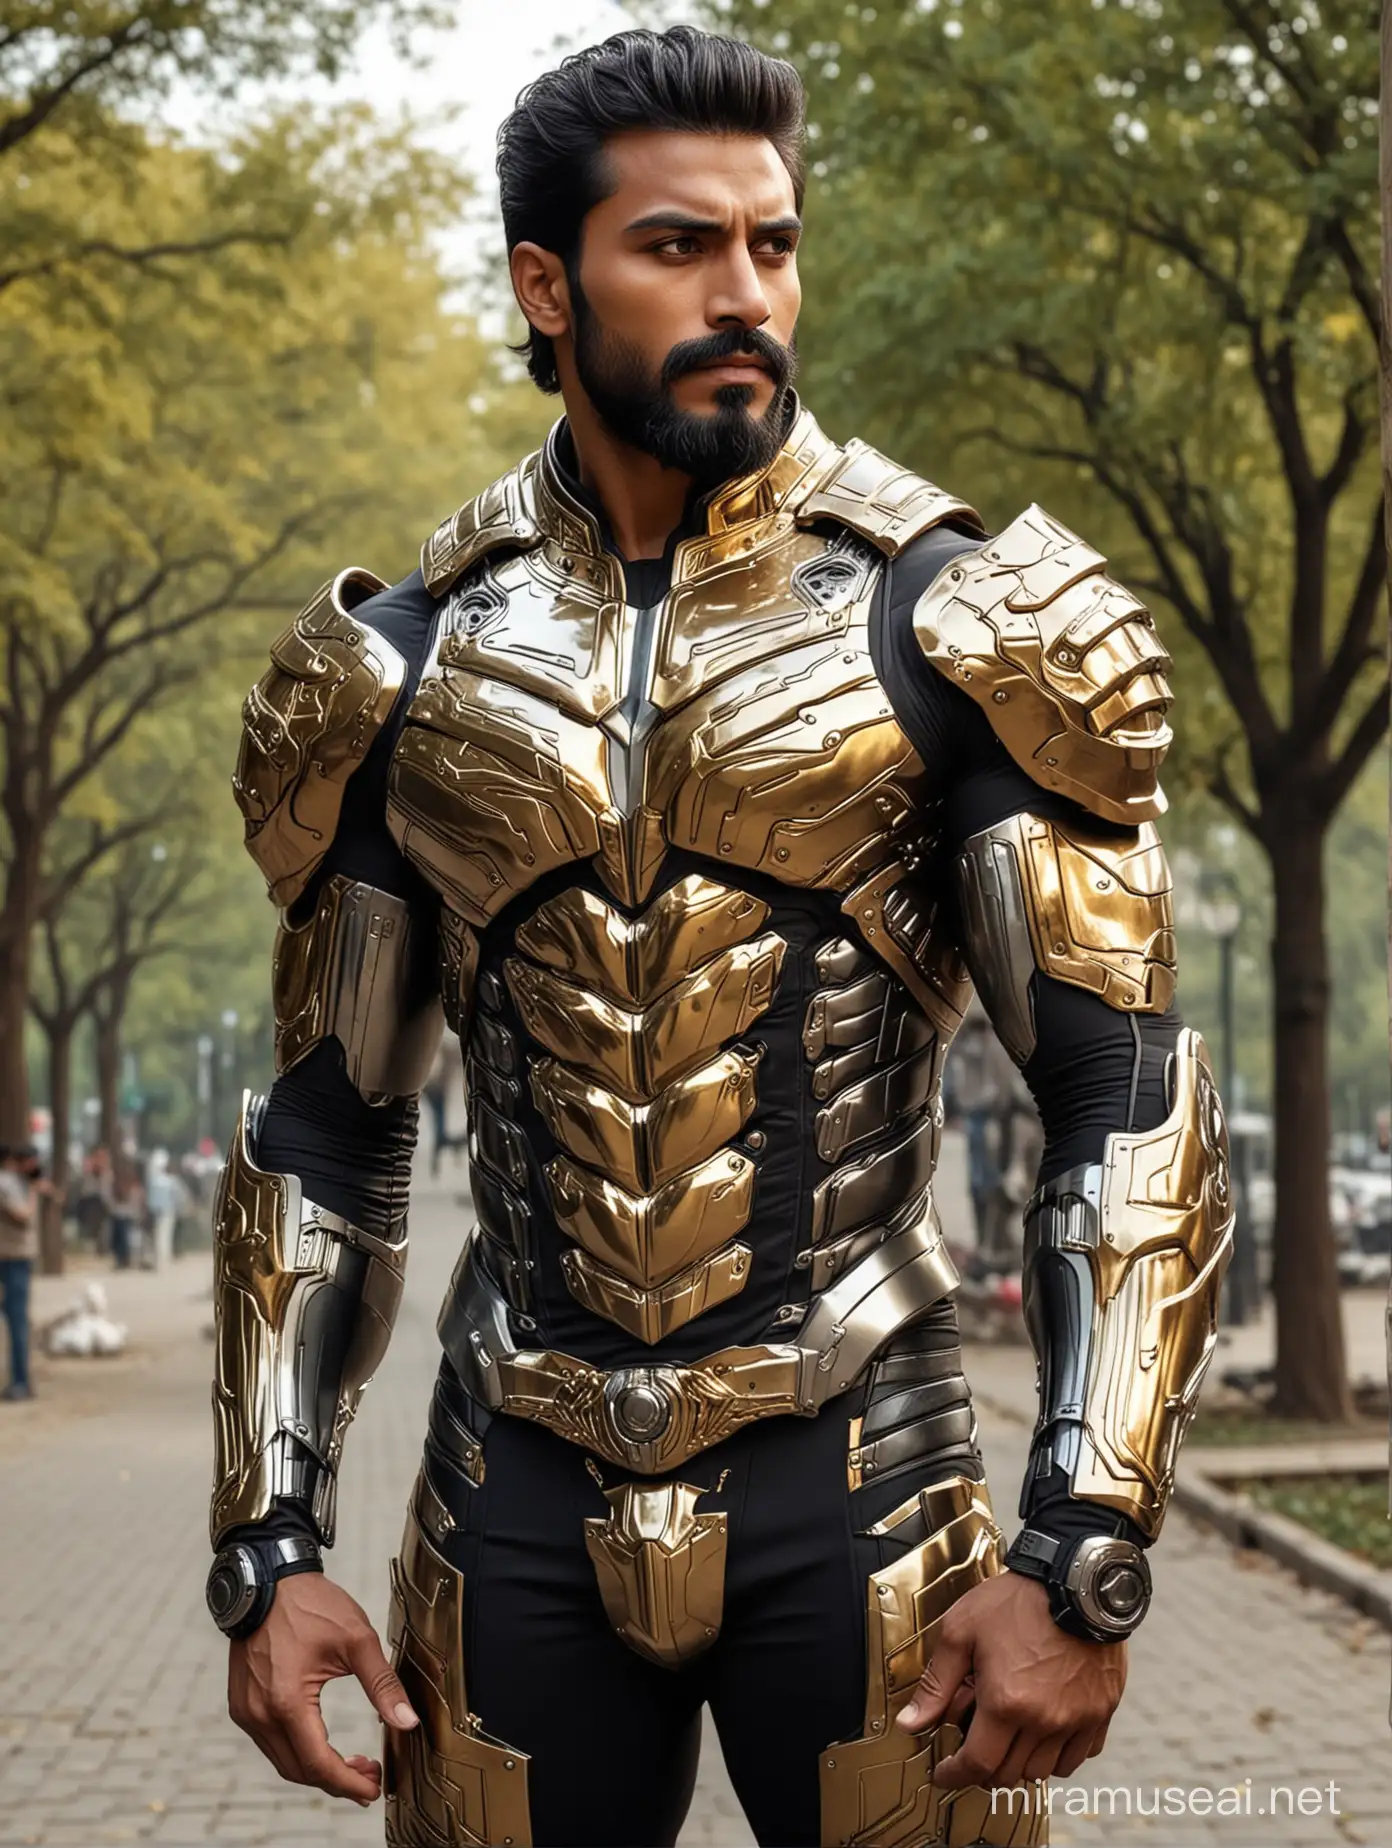 Tall and handsome bodybuilder Pakistani men with beautiful hairstyle and beard with attractive eyes and Broad shoulder and chest in sci-fi High Tech golden, sliver and black armour suit with firearms standing on park